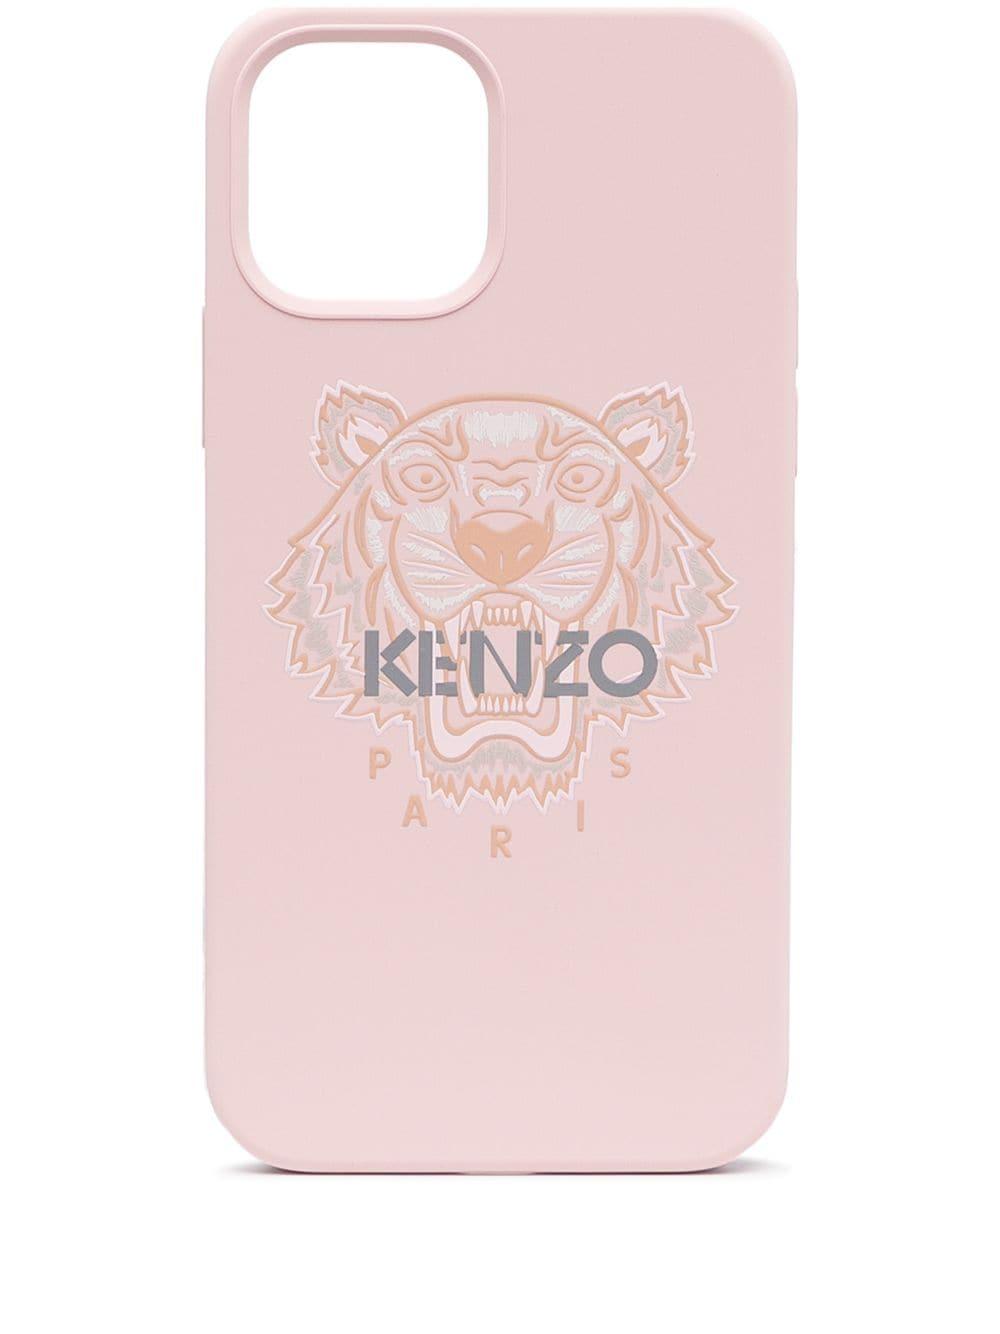 kenzo pink phone case Off 61% - wuuproduction.com